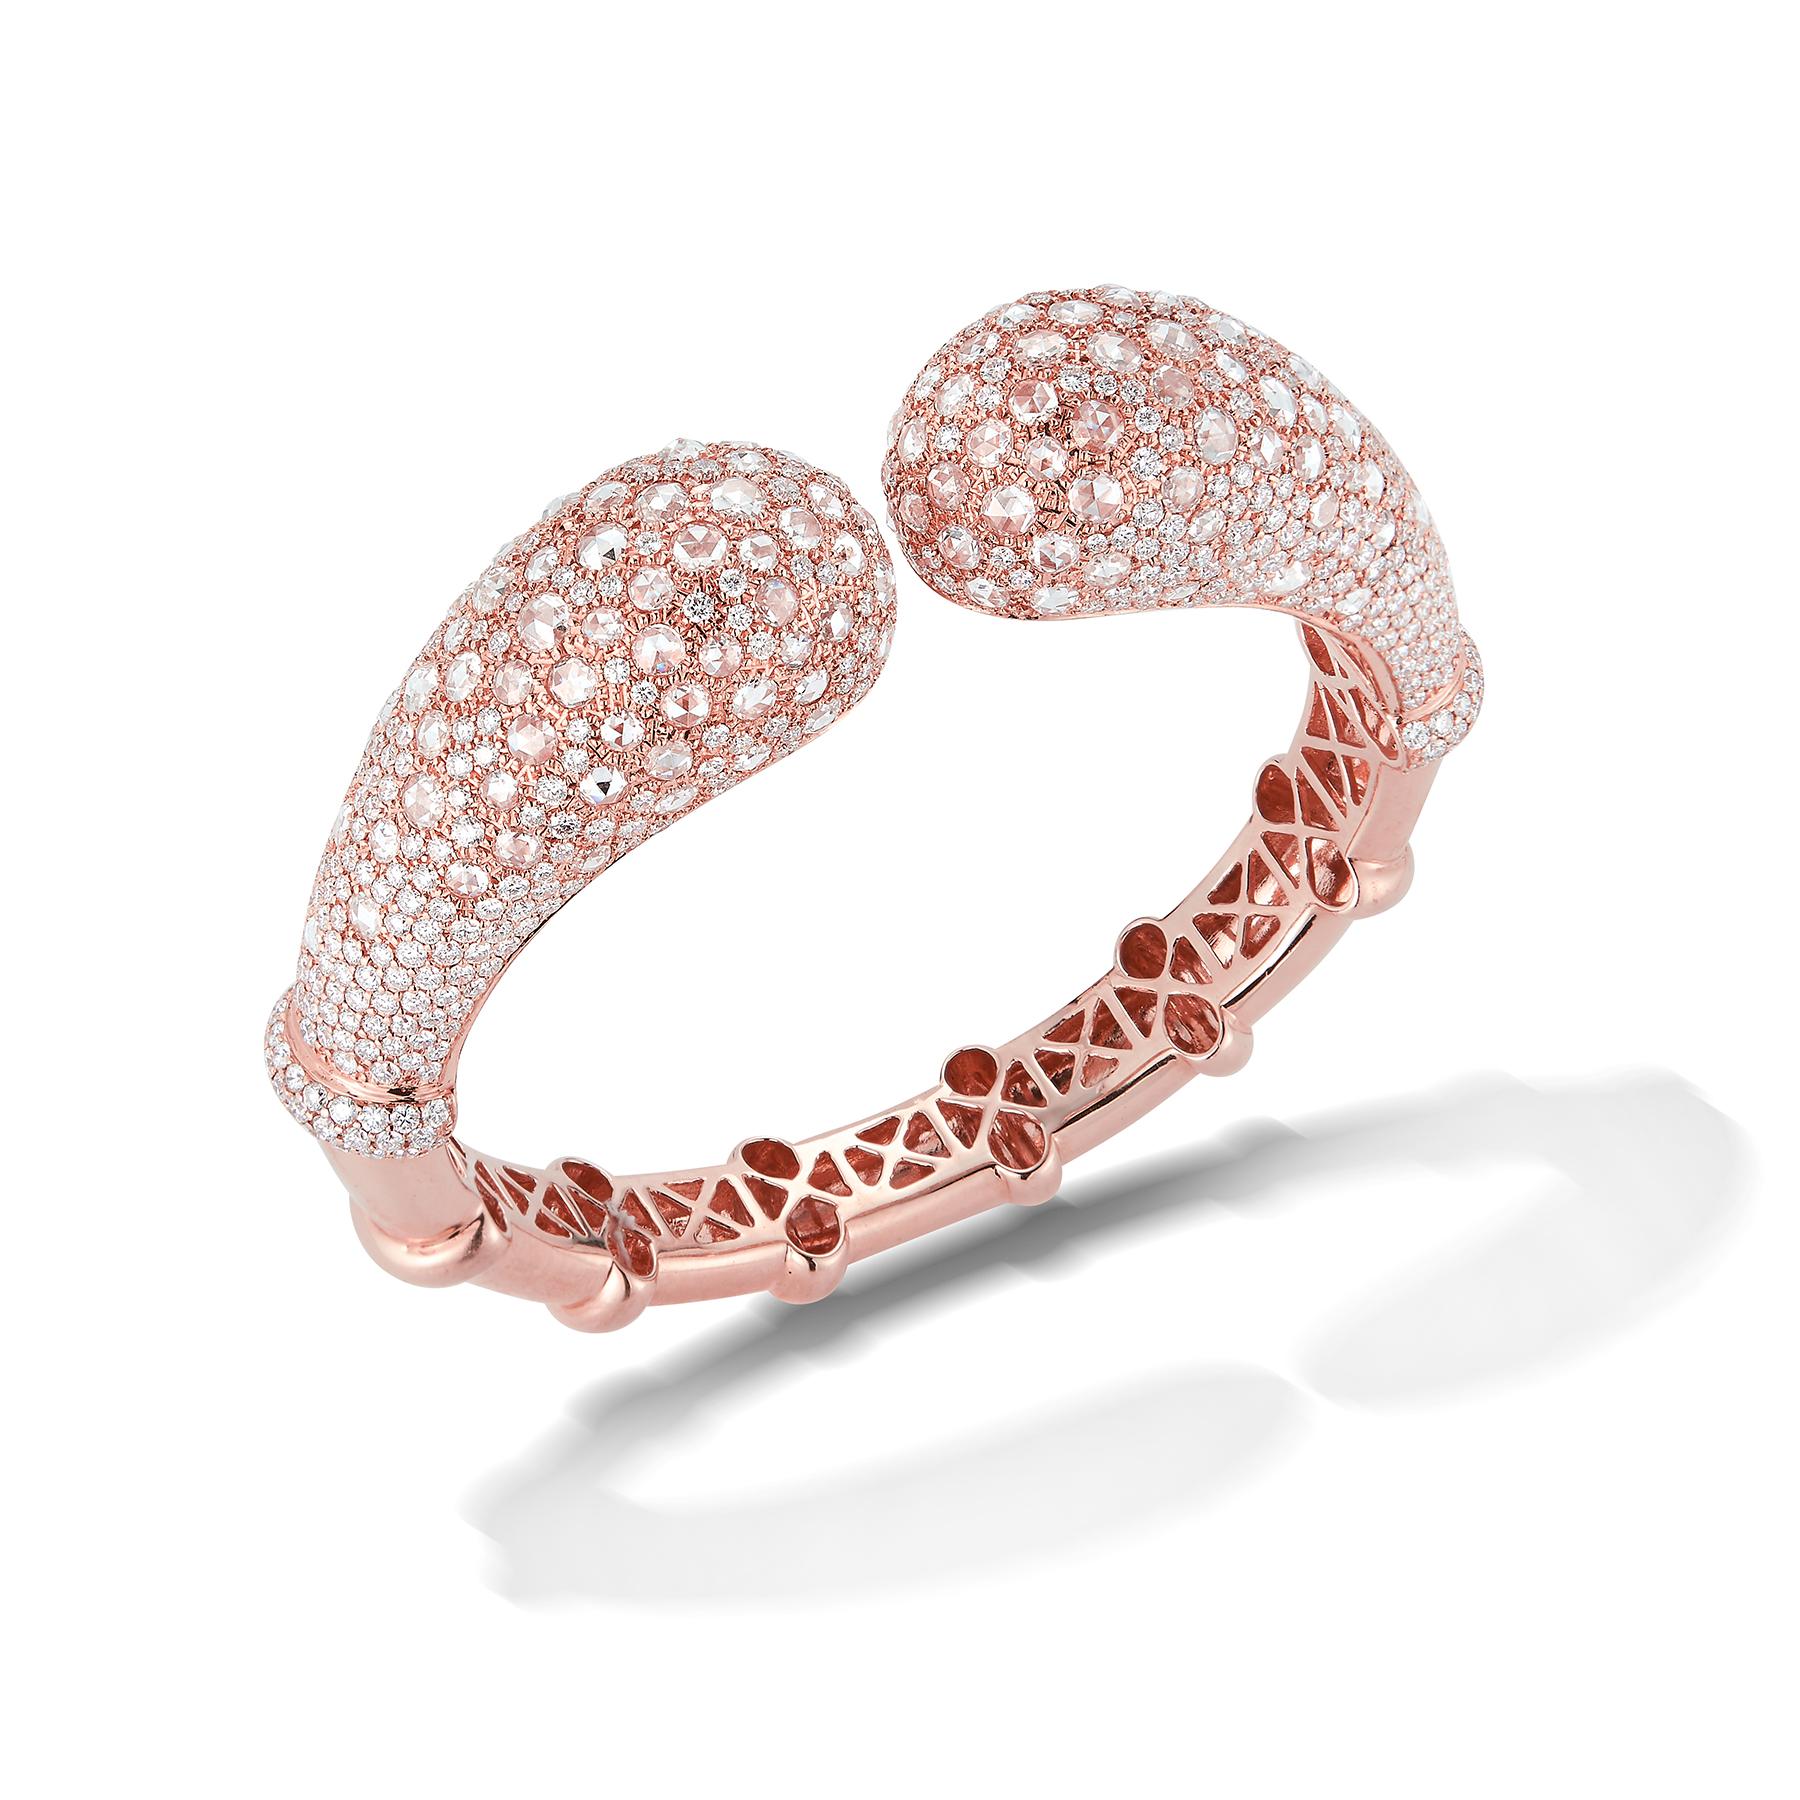 Beautiful 18K Pink Gold Bangle Bracelet in a wraparound Cuff-Style containing F-VS White Round Diamonds totaling 19.30 Carats.